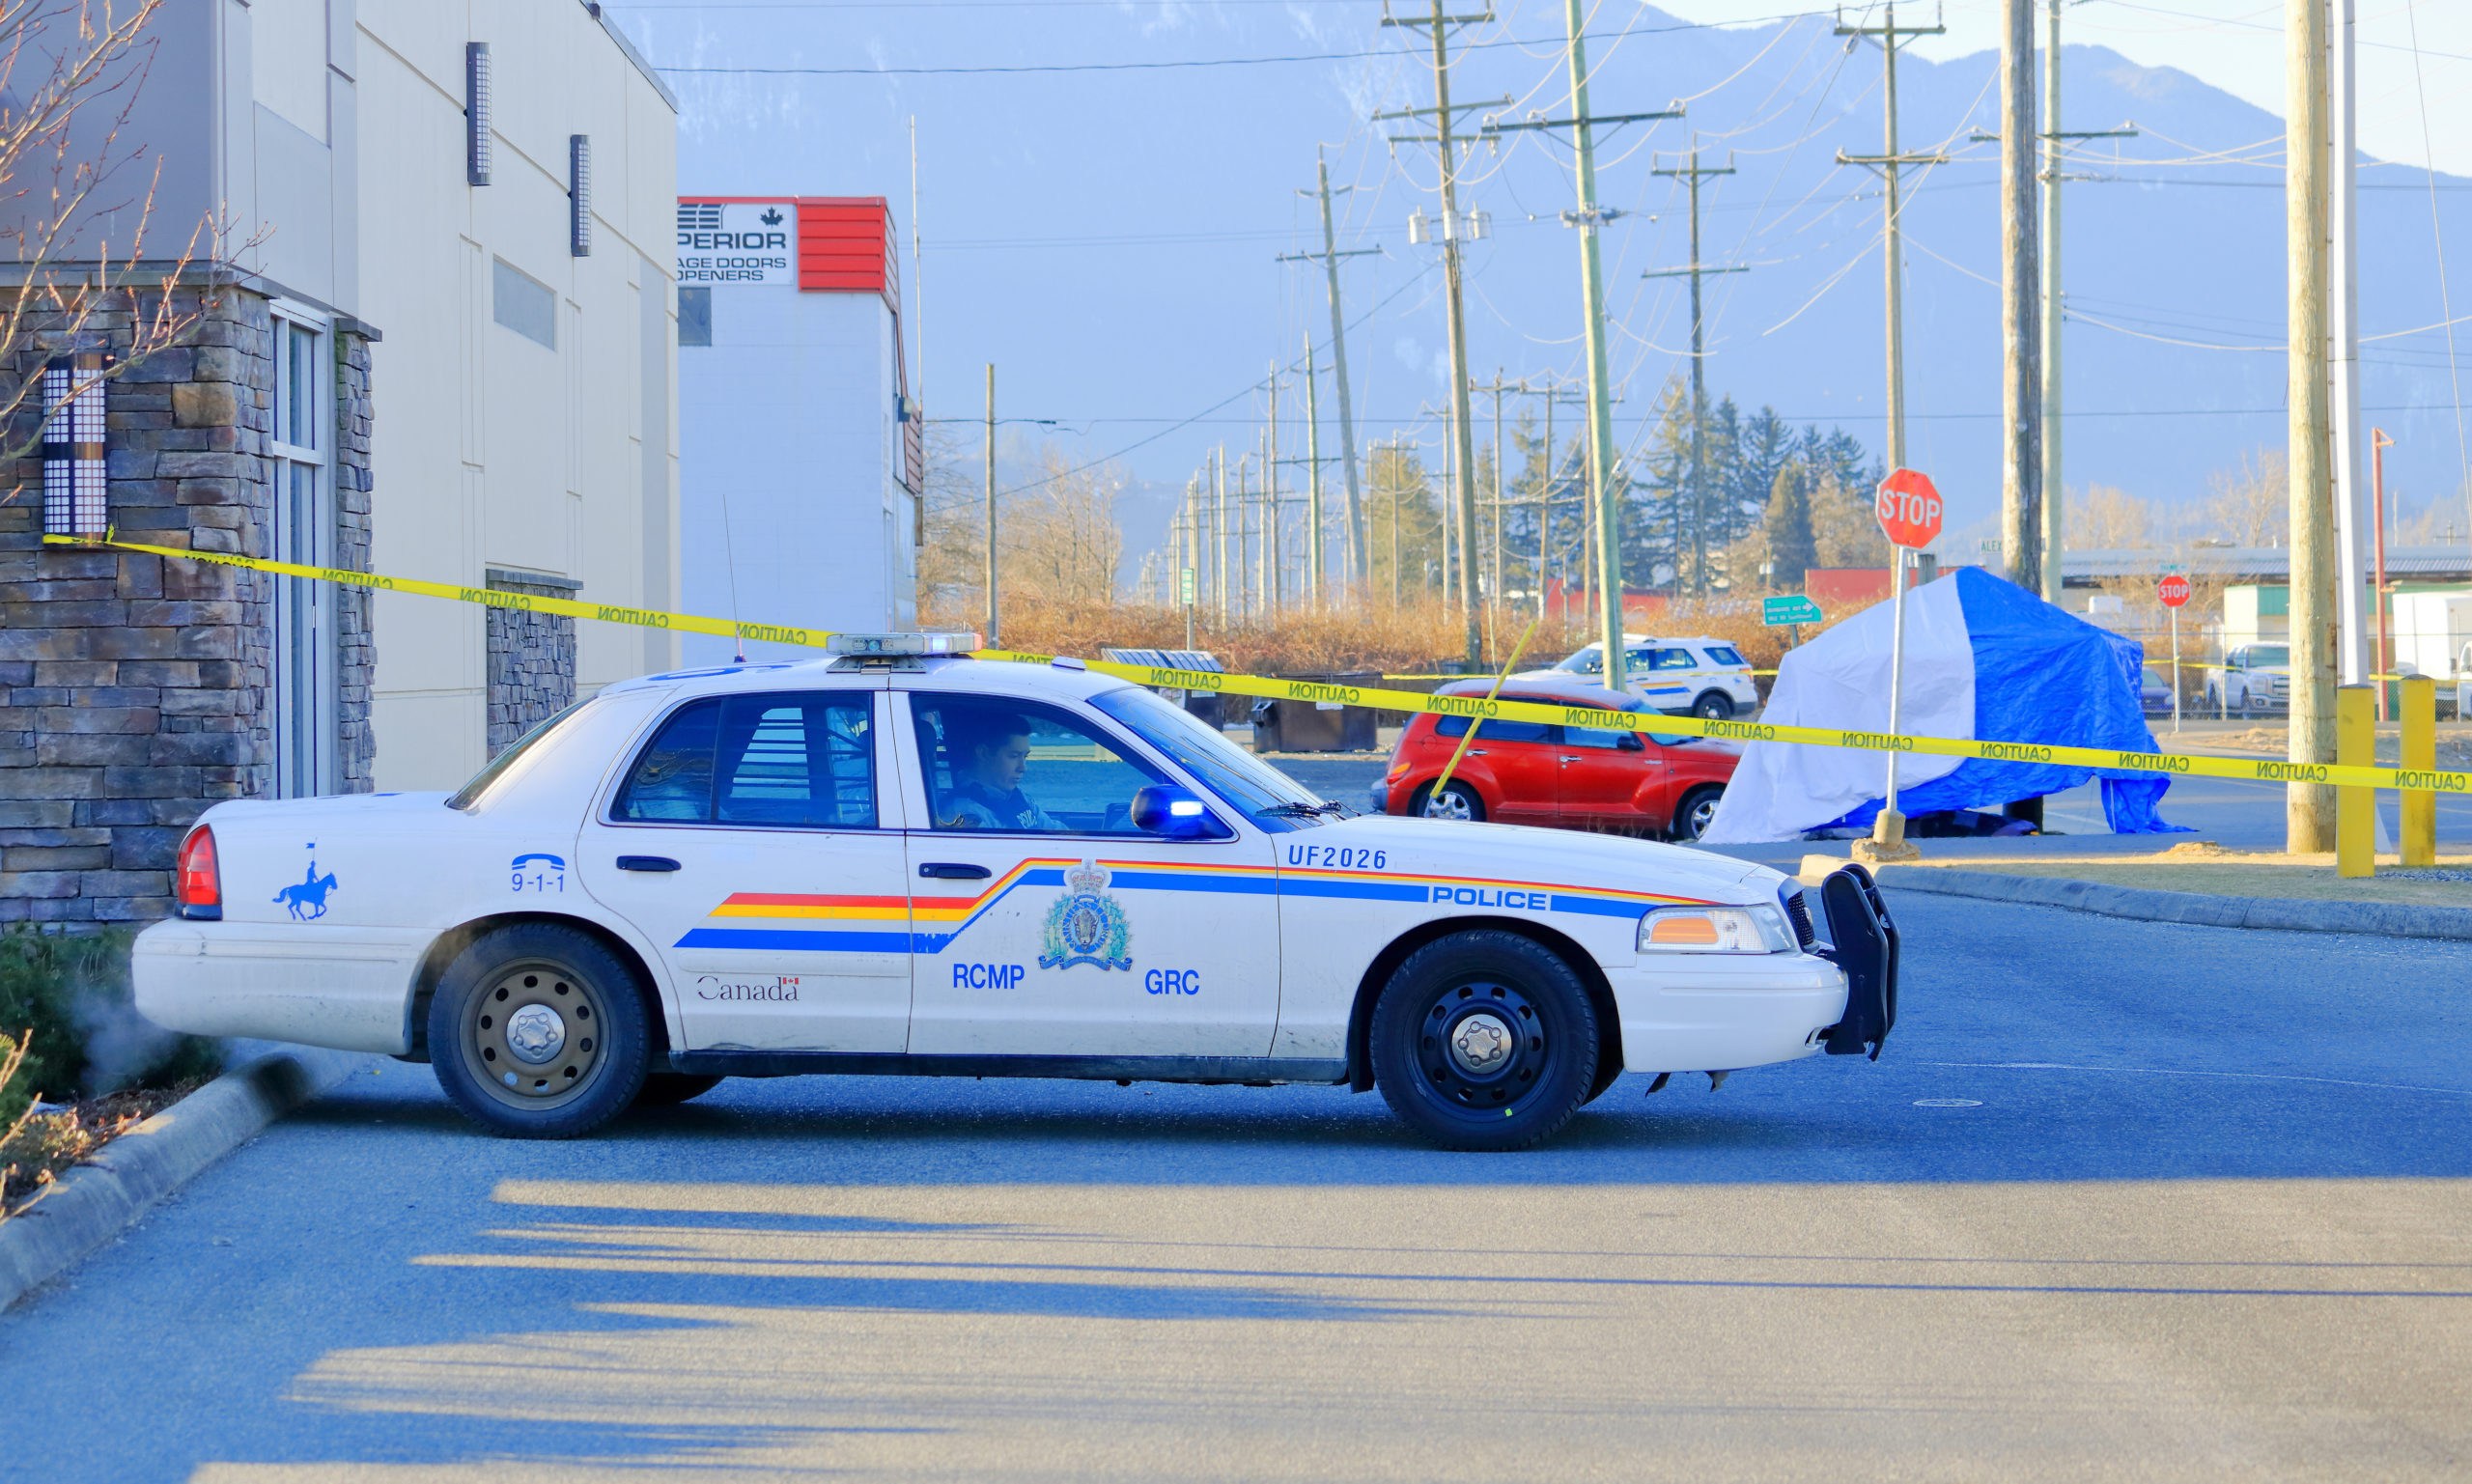 Vancouver Punjabi Youth shot to death in Prince George